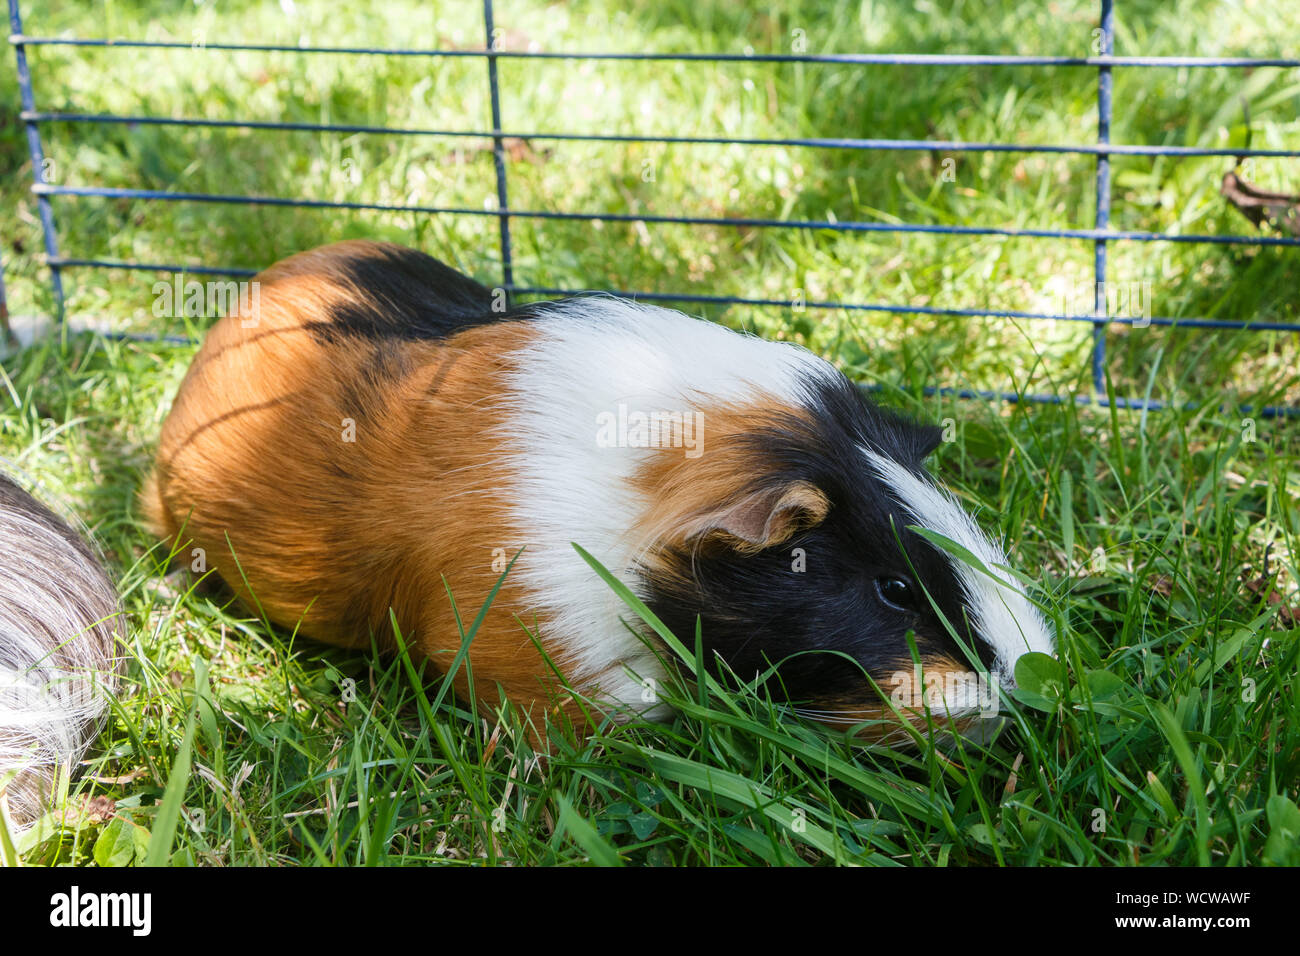 Guinea Pig Under A Wire Fencing In The Grass Of A Garden Stock